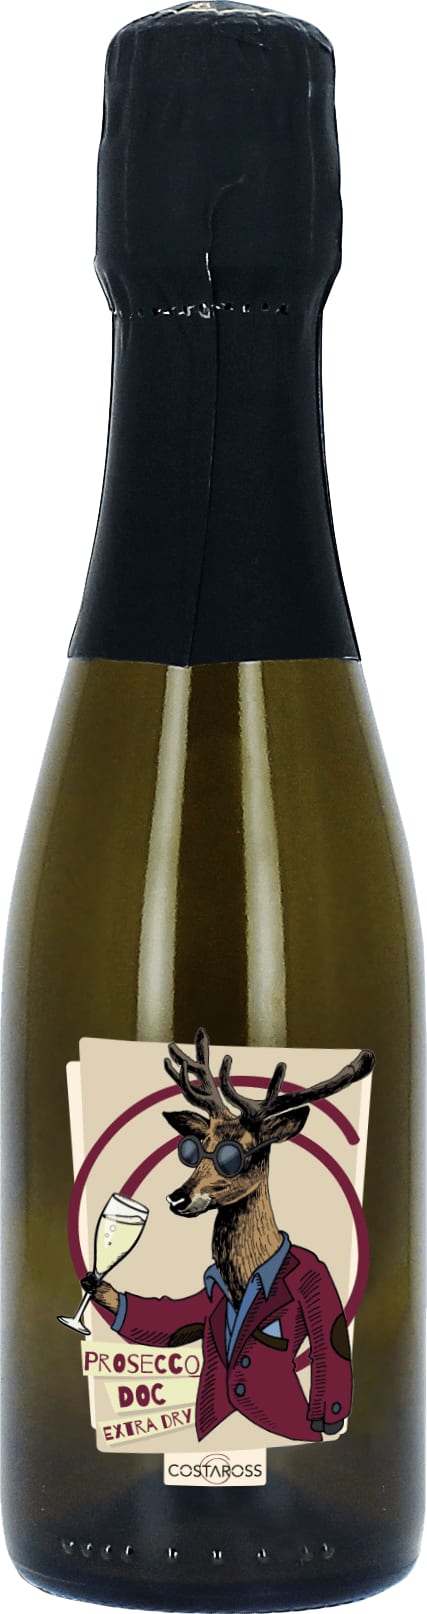 Costaross NV Prosecco DOC Extra Dry, Costaross 20cl 20cl NV - Buy Costaross Wines from GREAT WINES DIRECT wine shop